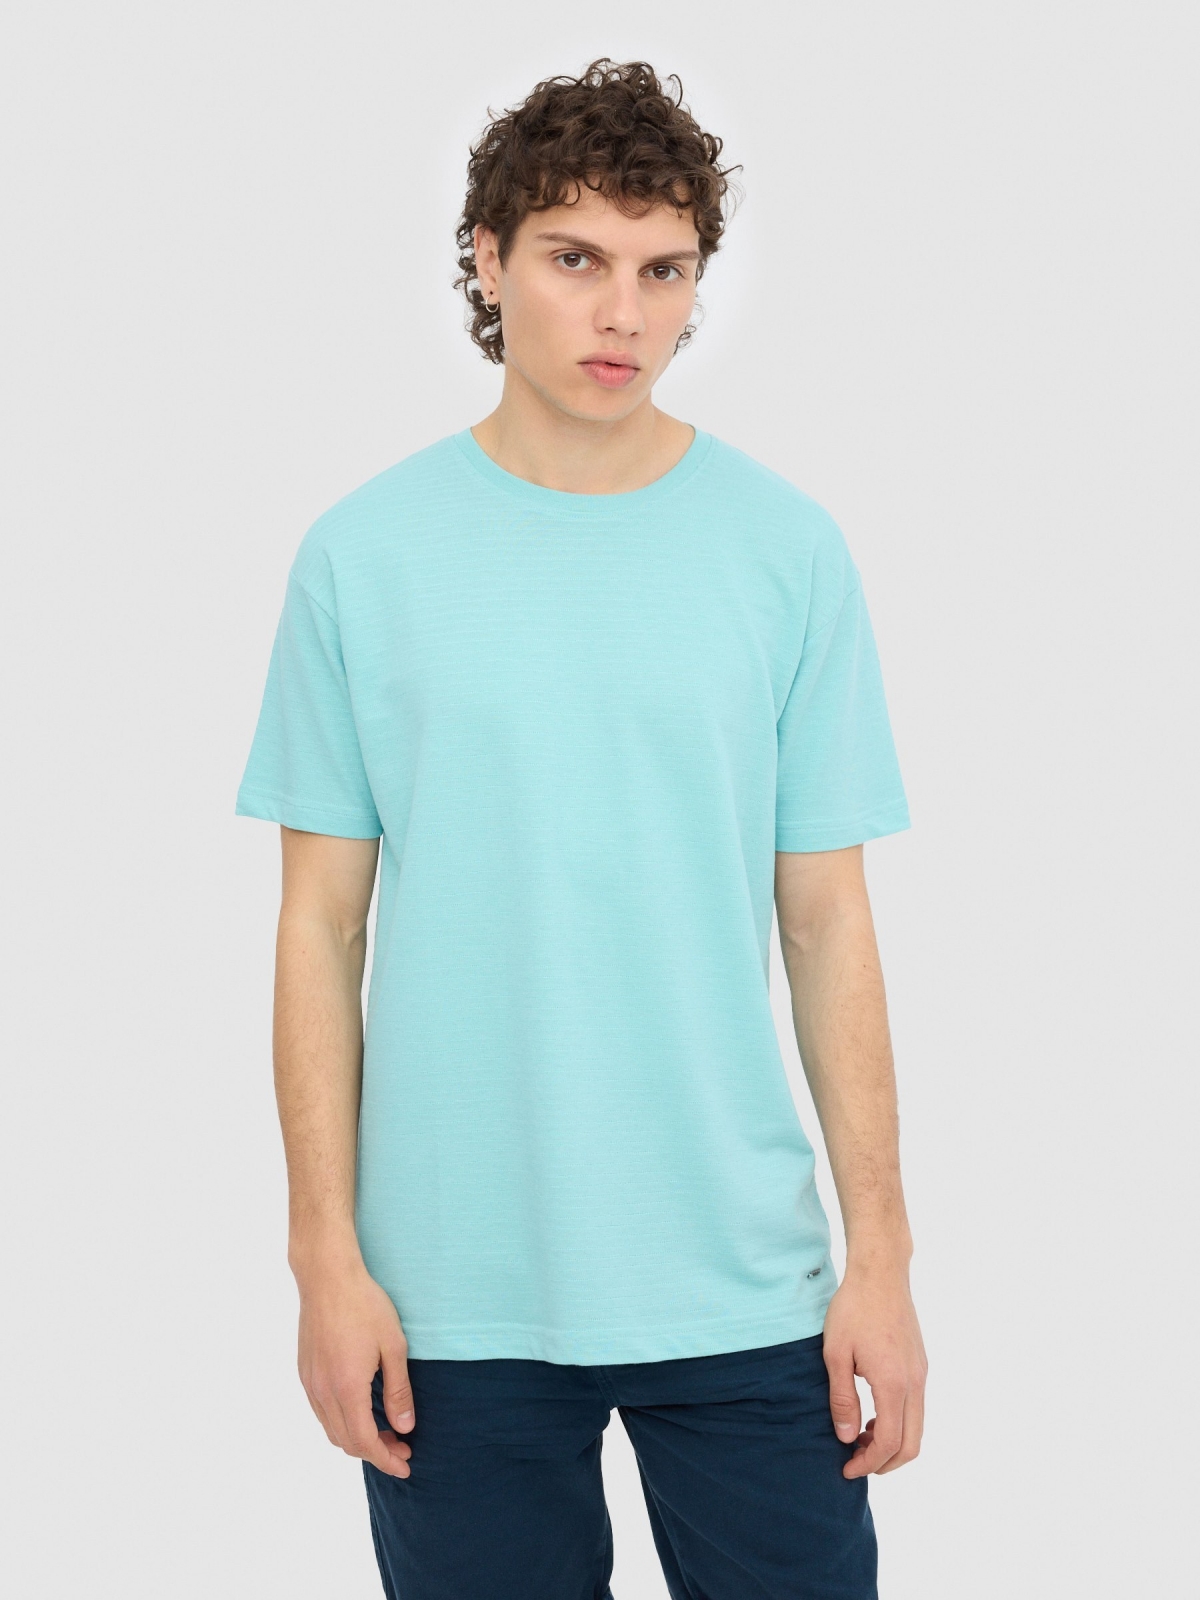 Striped T-shirt light blue middle front view